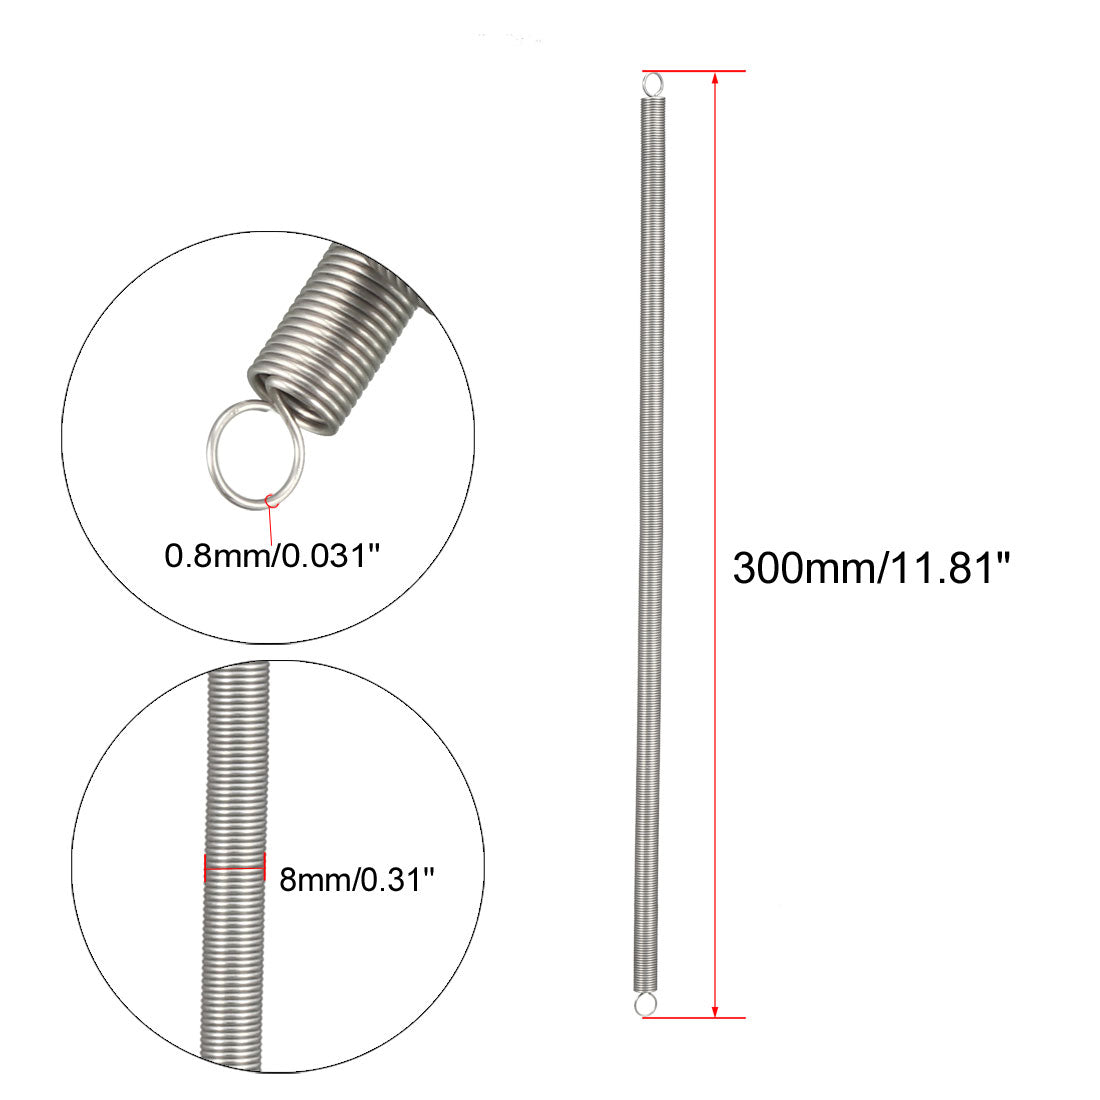 uxcell Uxcell Extended Tension Spring Wire Diameter 0.031", OD 0.31", Free Length 11.81"